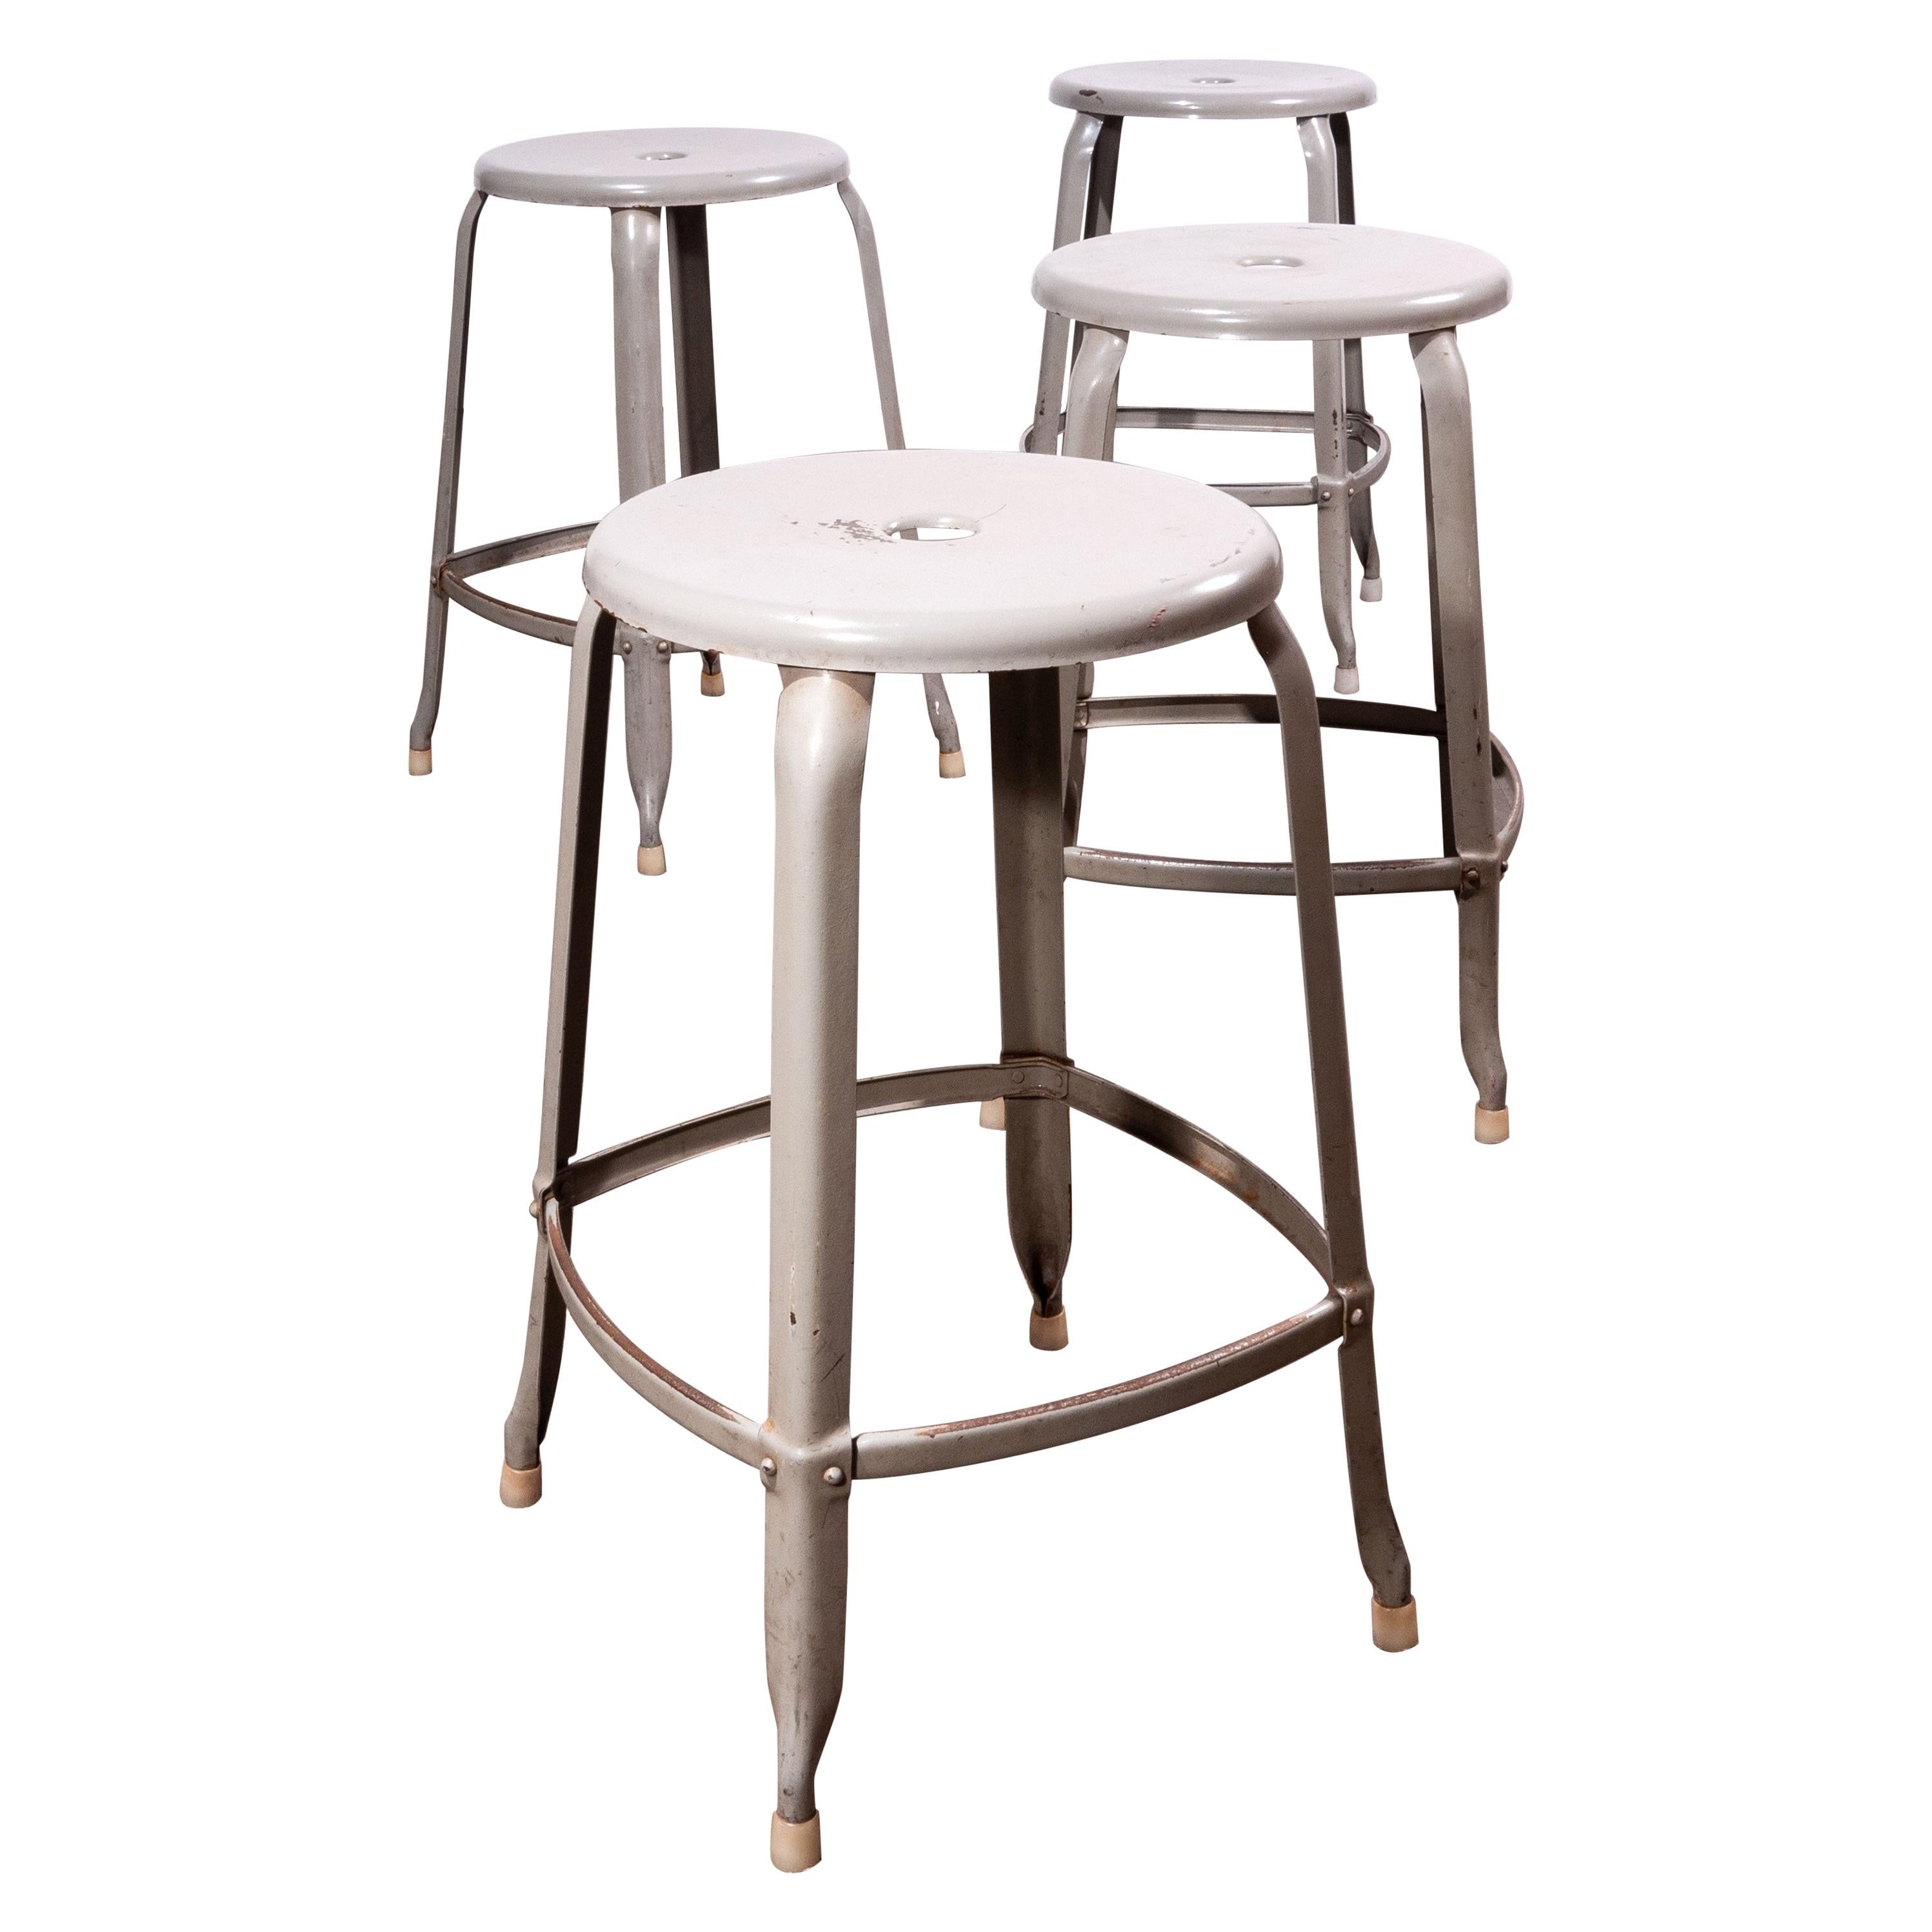 1950s Original Industrial Nicholle Stacking Stools - Set Of Four